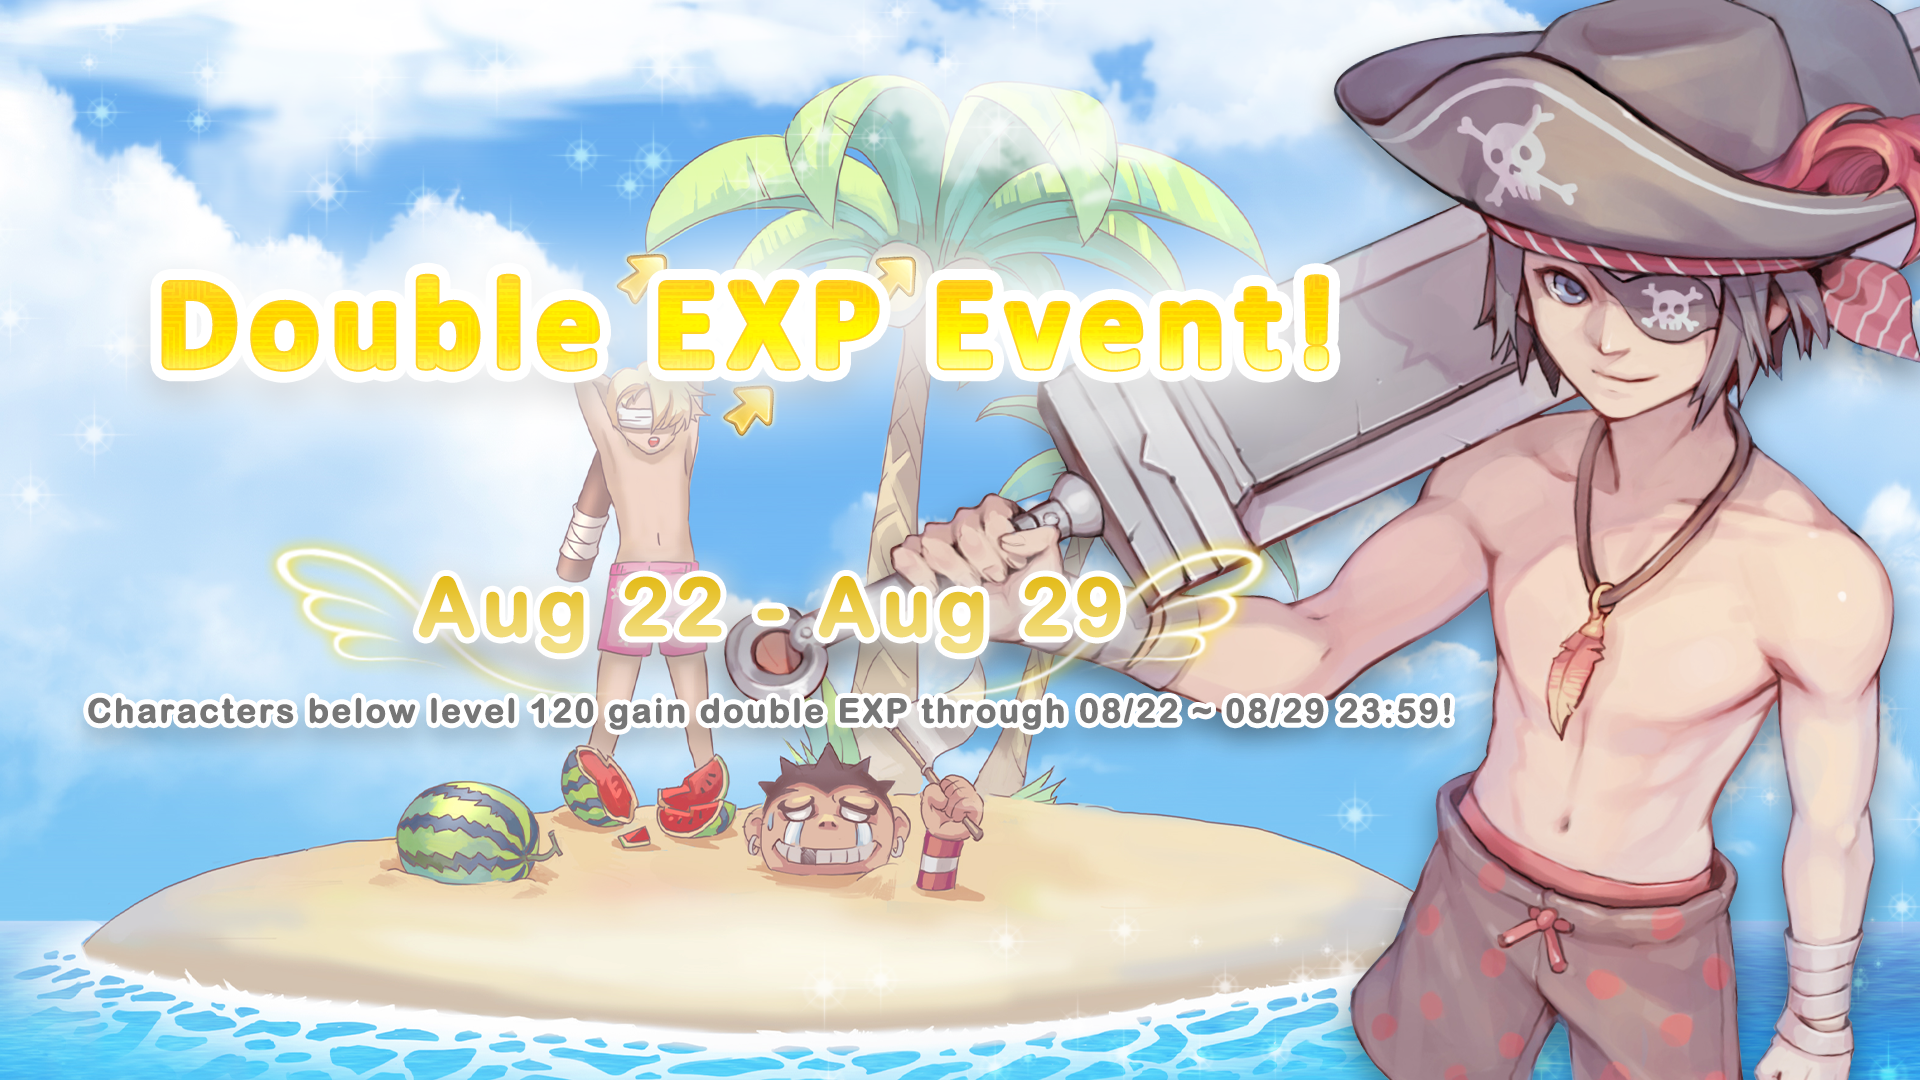 Double EXP Event!